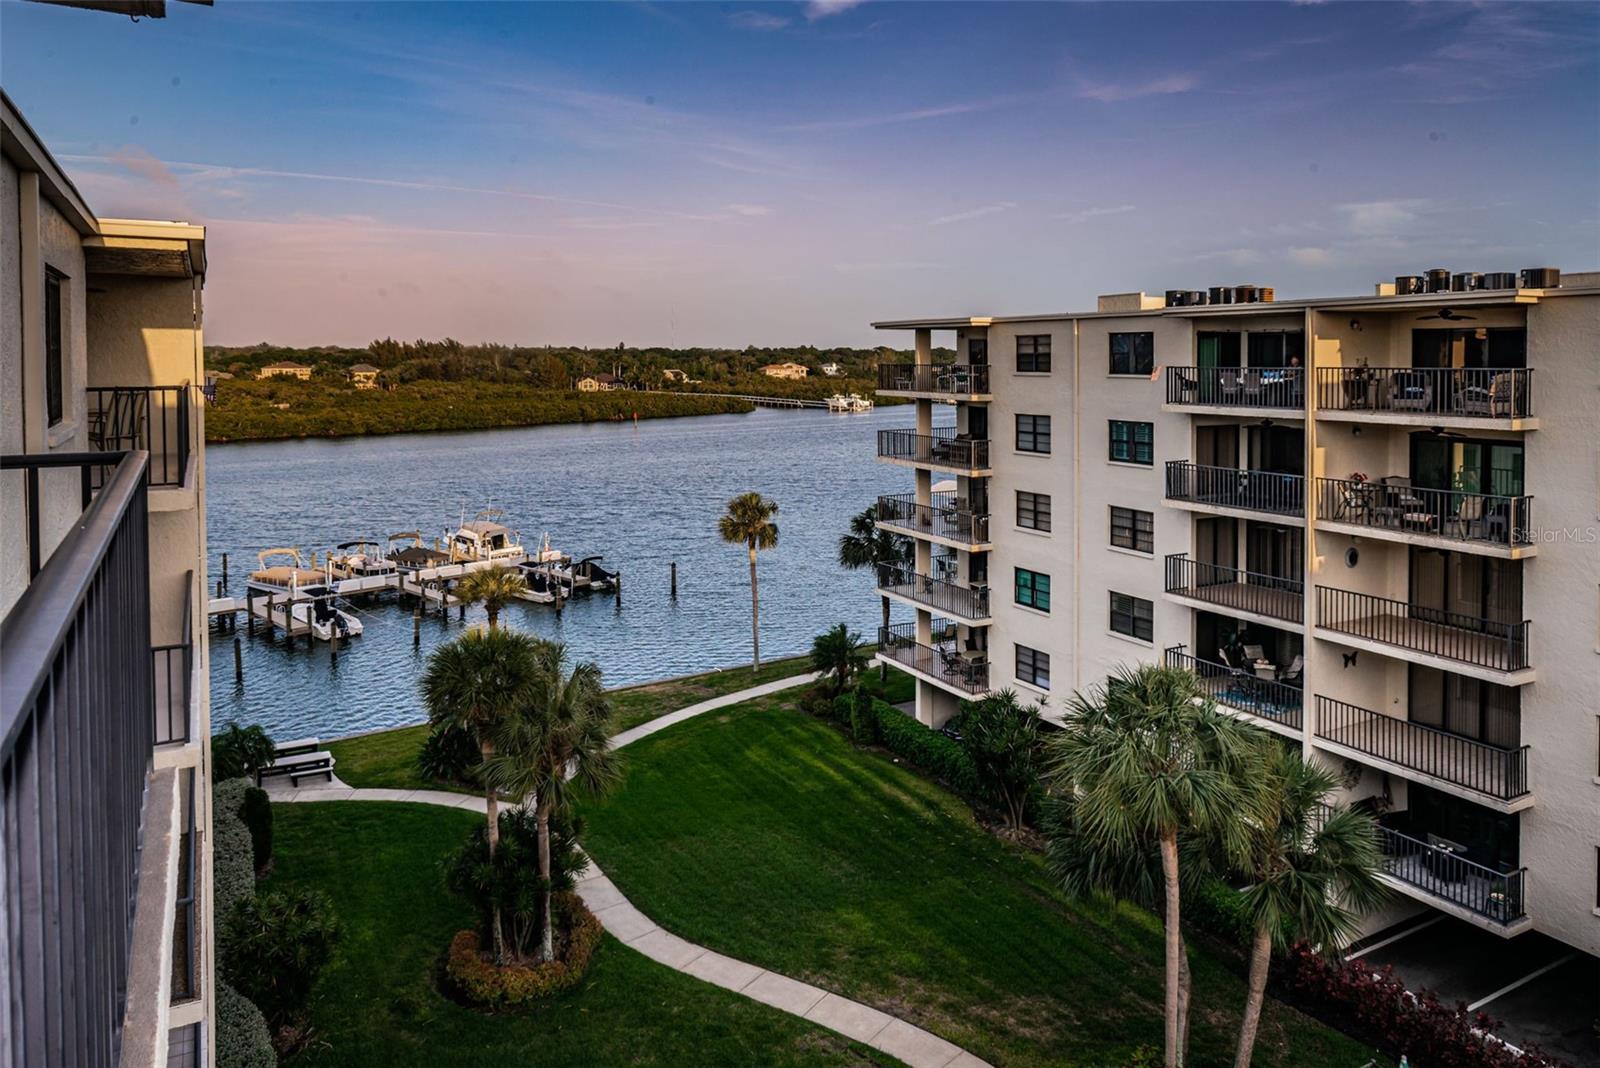 Balcony view of the Intracoastal Waterway